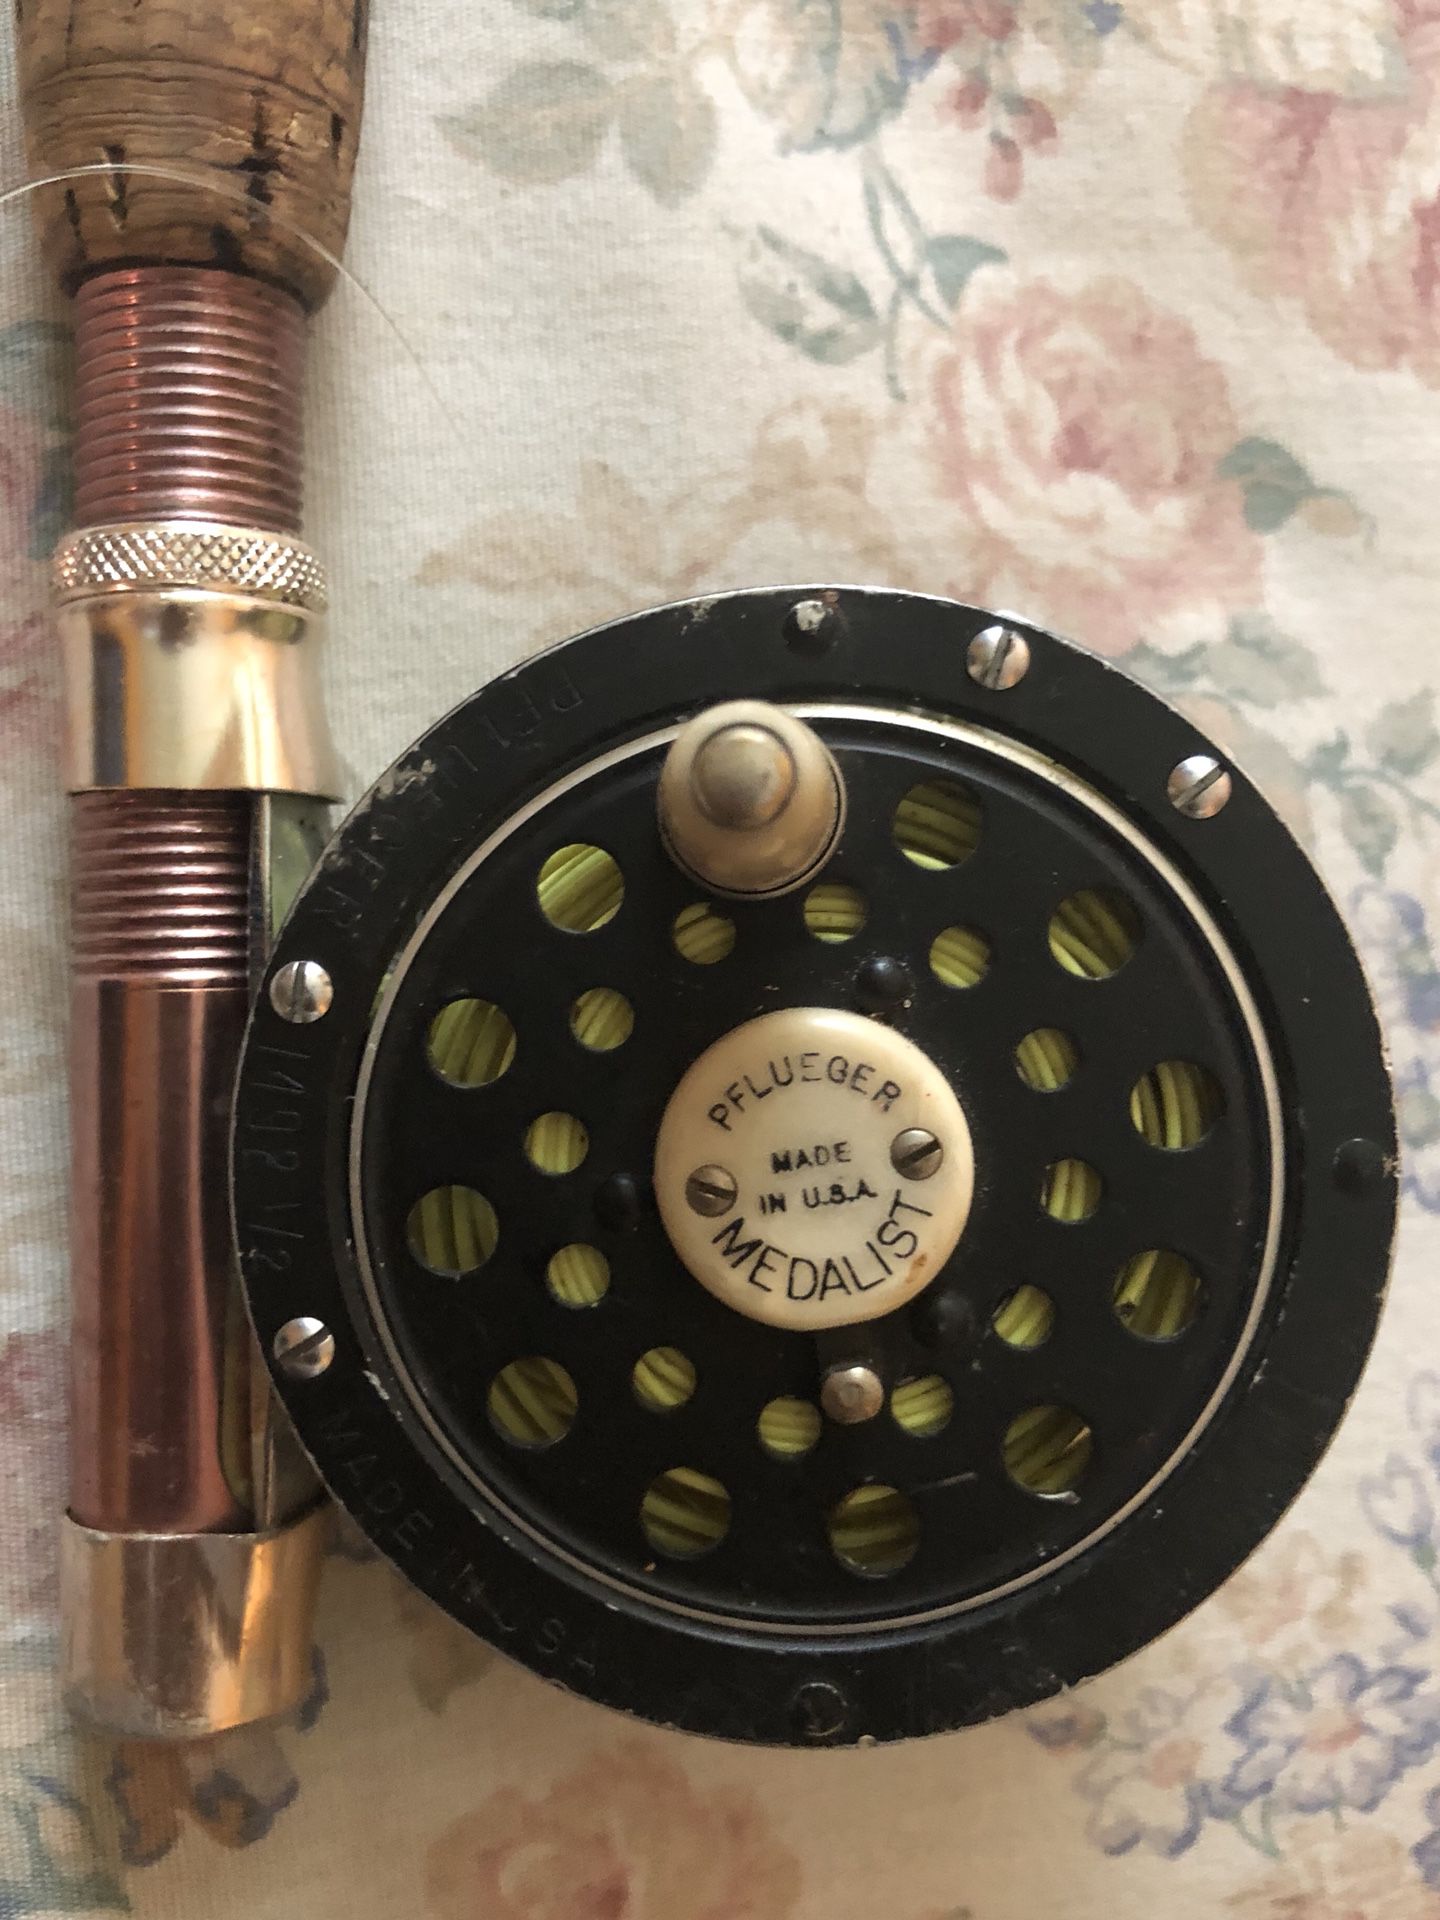 PFLUEGER MEDALIST Fly fishing reel and rod